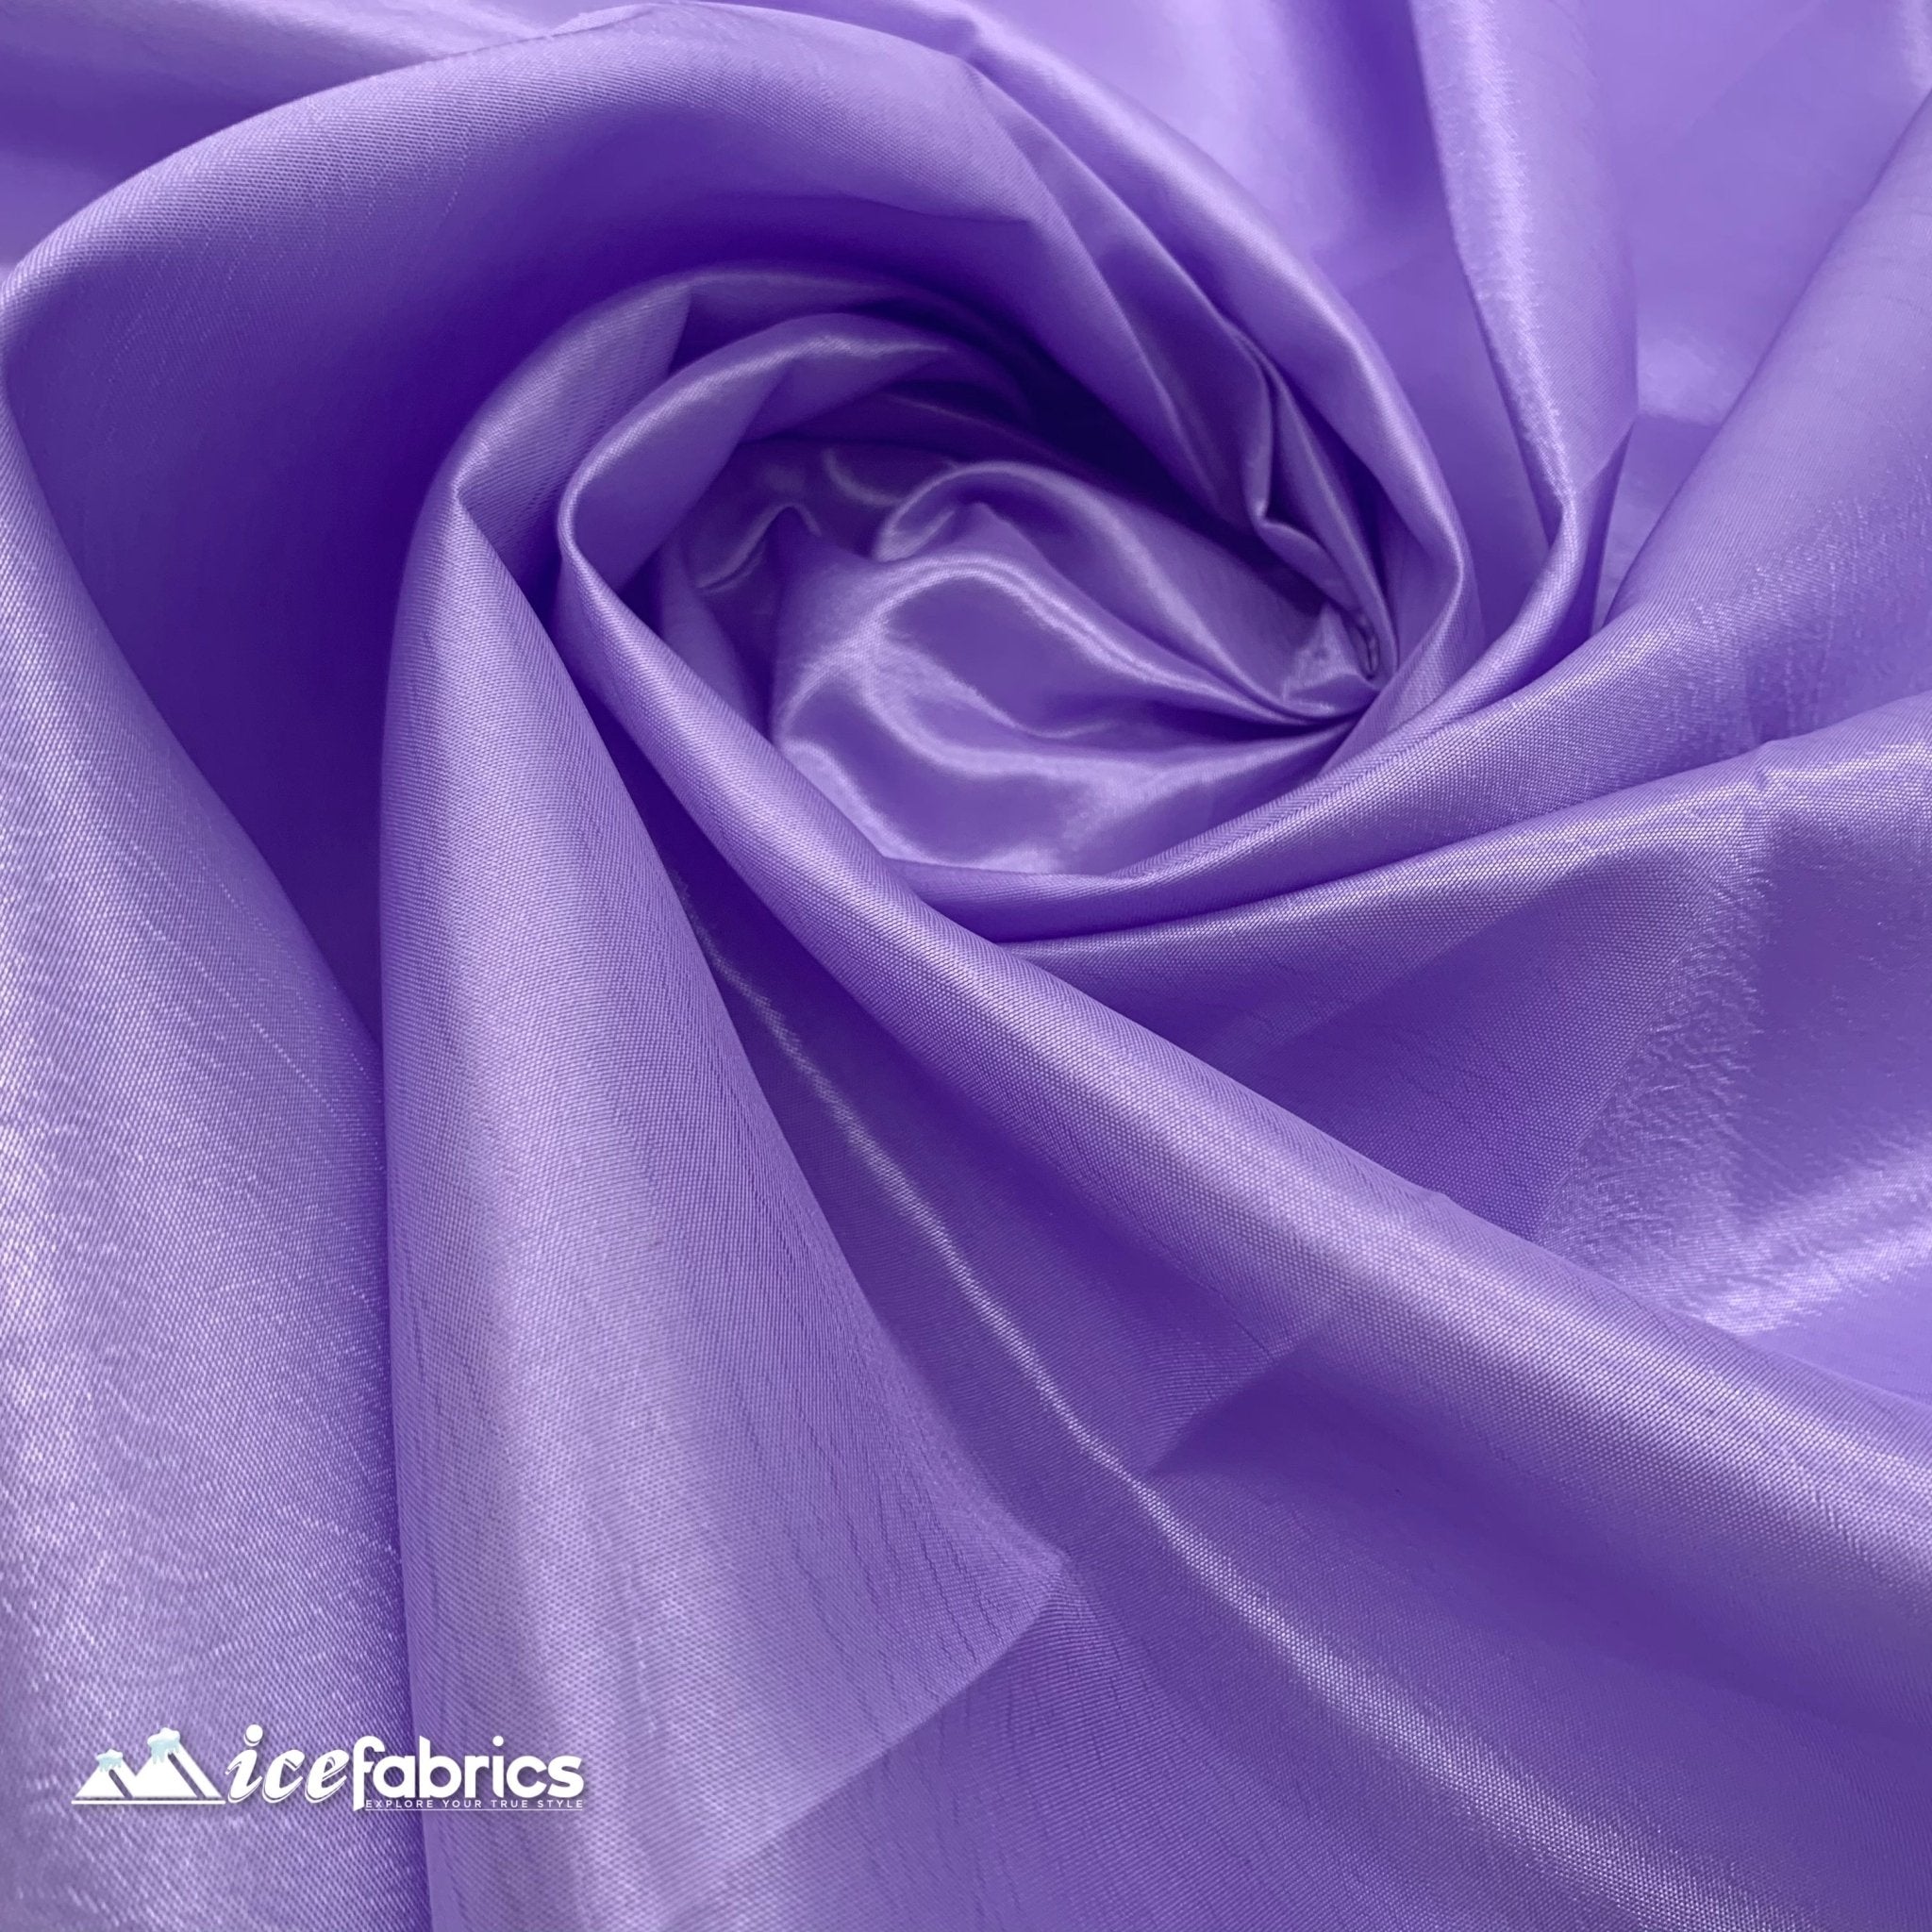 High Quality Solid Taffeta Fabric_ 60" Width_ By The YardTaffeta FabricICEFABRICICE FABRICSIvoryHigh Quality Solid Taffeta Fabric_ 60" Width_ By The YardTaffeta FabricICEFABRICICE FABRICSLavenderHigh Quality Solid Taffeta Fabric_ 60" Width_ By The Yard ICEFABRIC Lavender